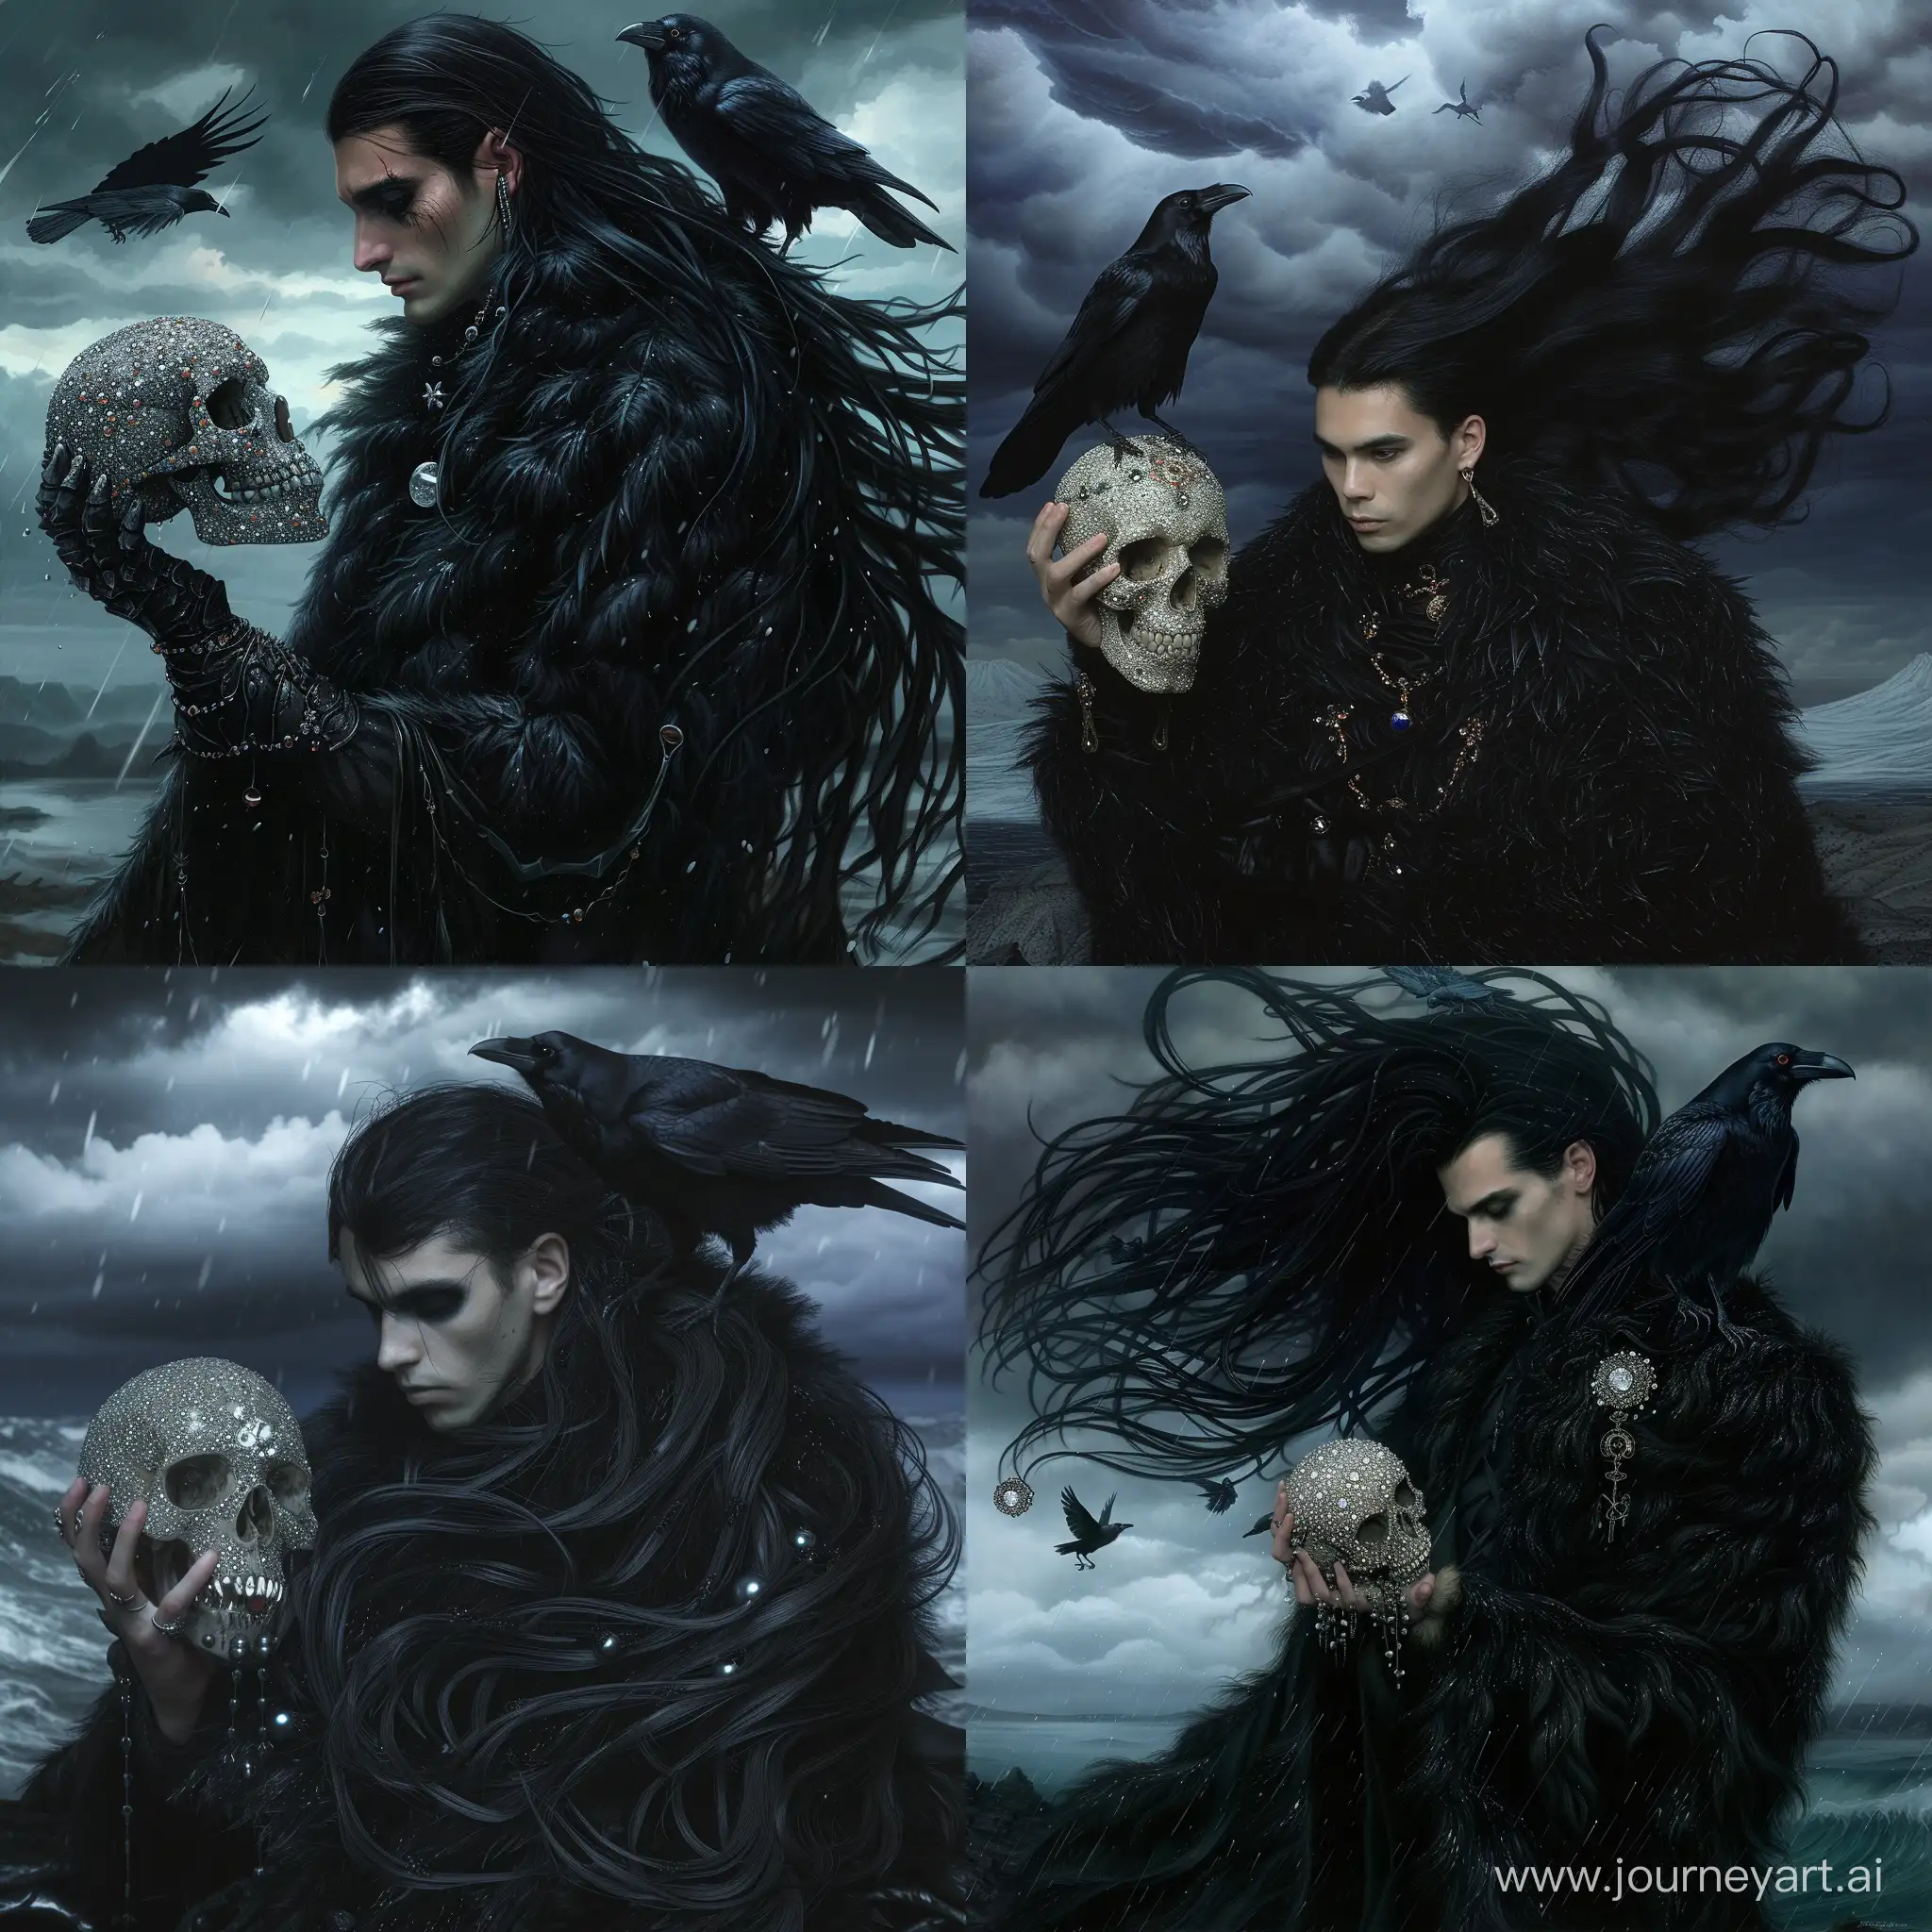 a guy in a black fur coat of flowing black hair against a gloomy night stormy sky, holding a skull studded with sparkling rhinestones, a black raven sits on his shoulder